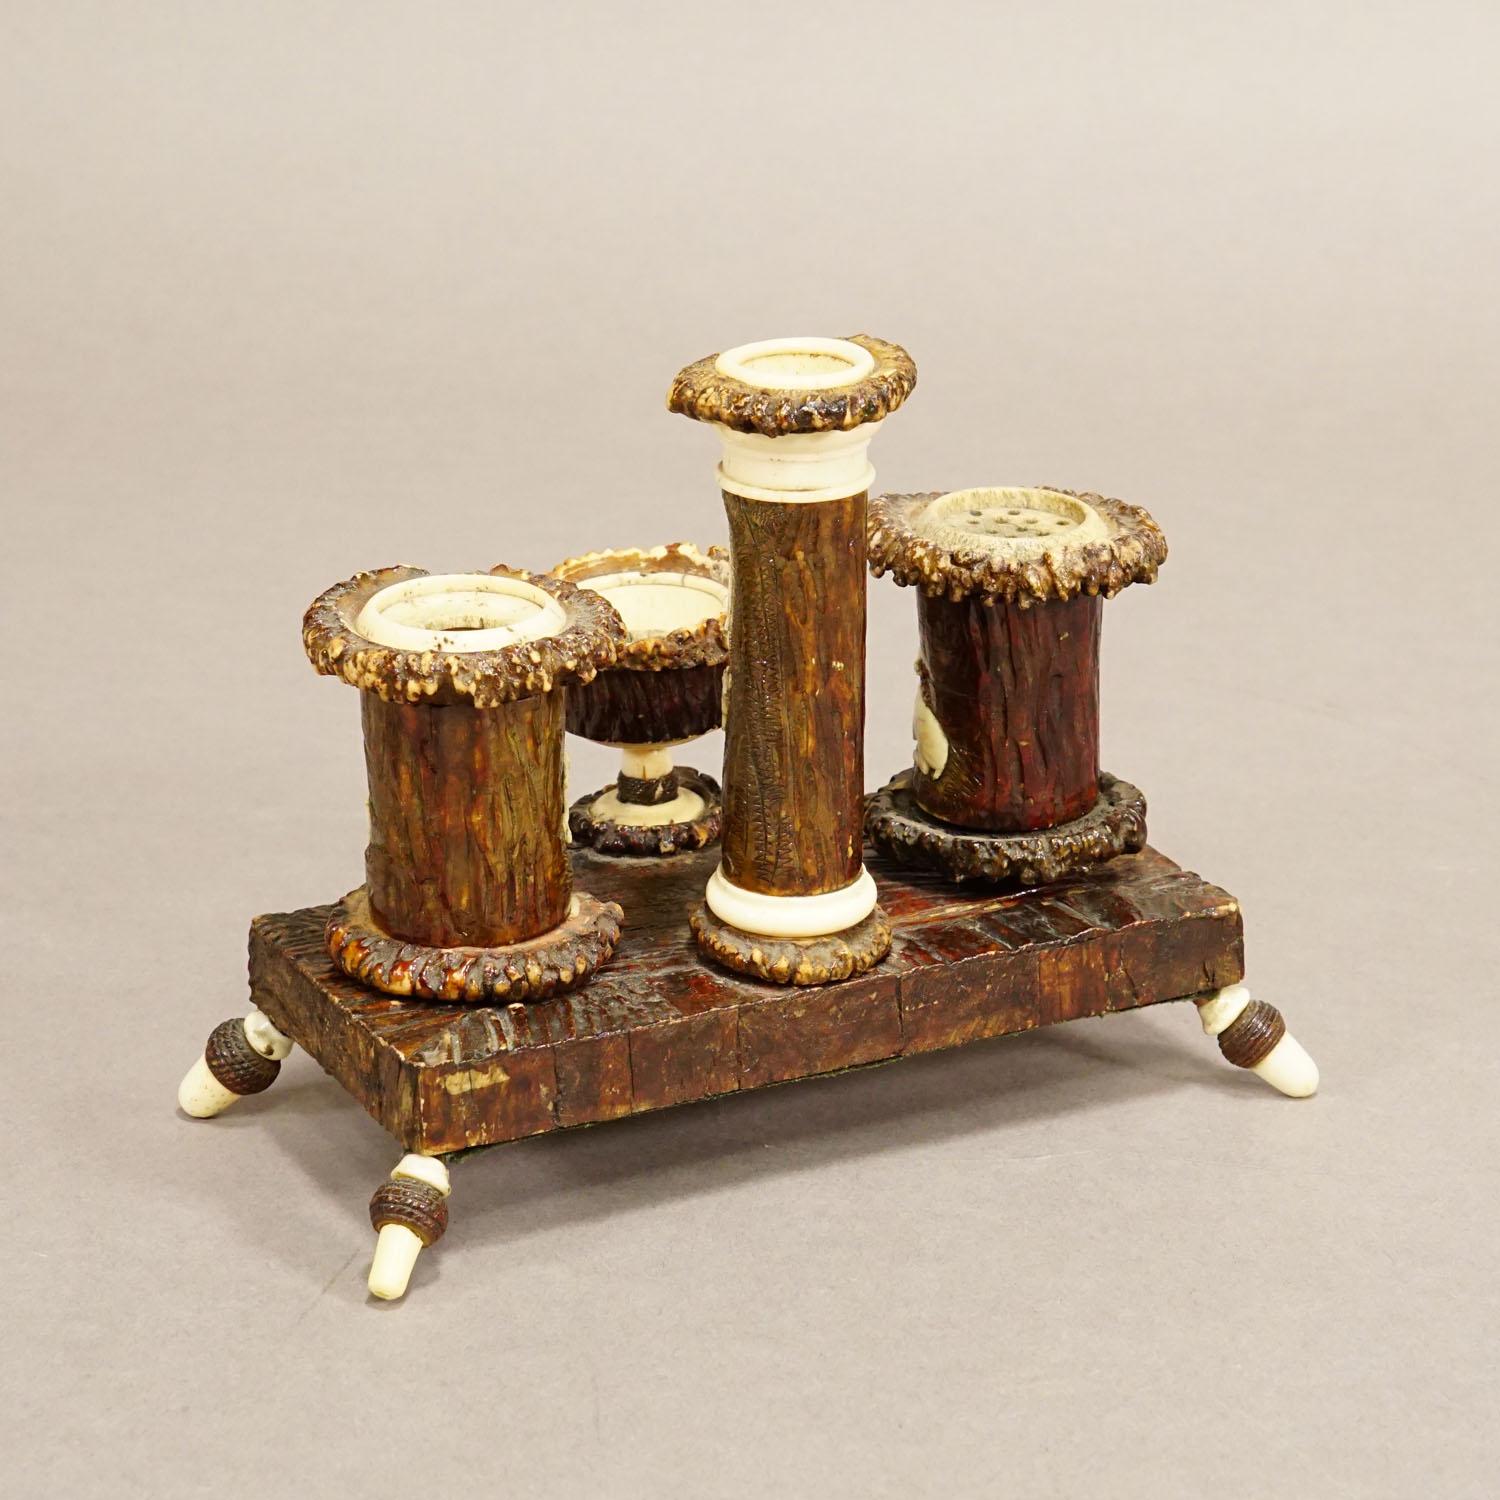 Rare Antler Desk Standish with Elaborate Carvings, Germany ca. 1840 In Good Condition For Sale In Berghuelen, DE